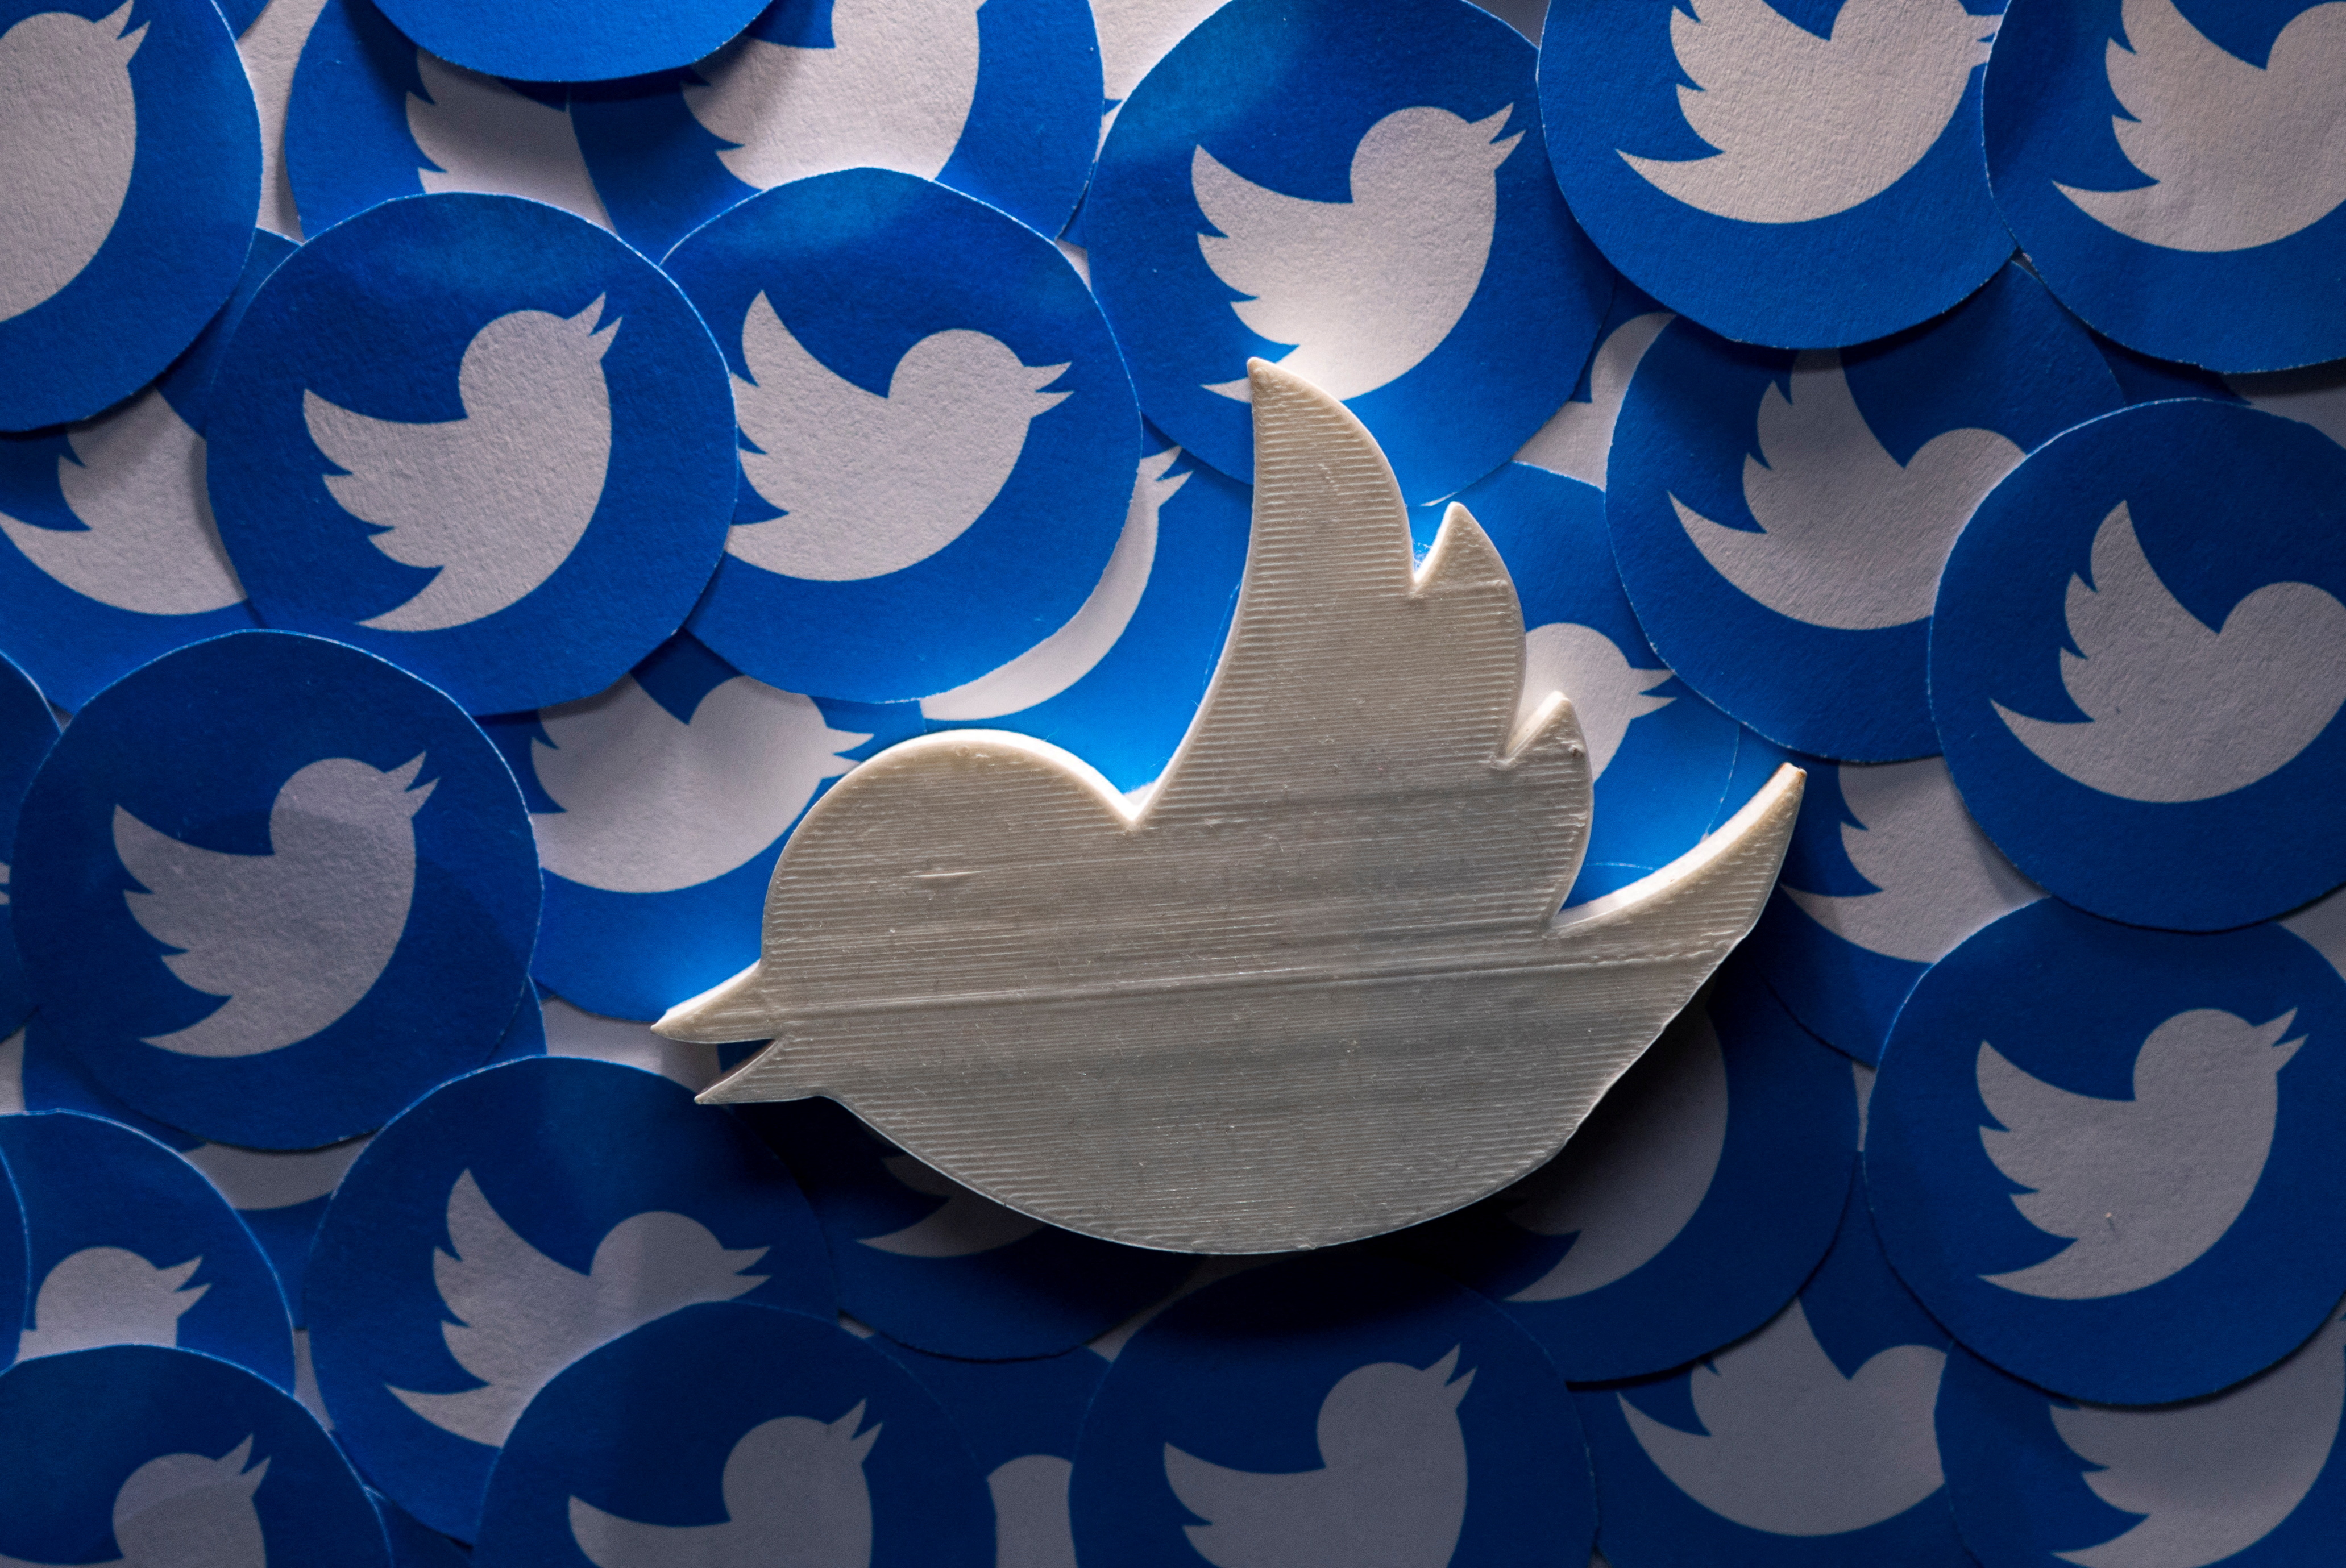 FILE PHOTO: A 3D-printed Twitter logo on non-3D printed Twitter logos is seen in this picture illustration taken April 28, 2022. REUTERS/Dado Ruvic/Illustration/File Photo